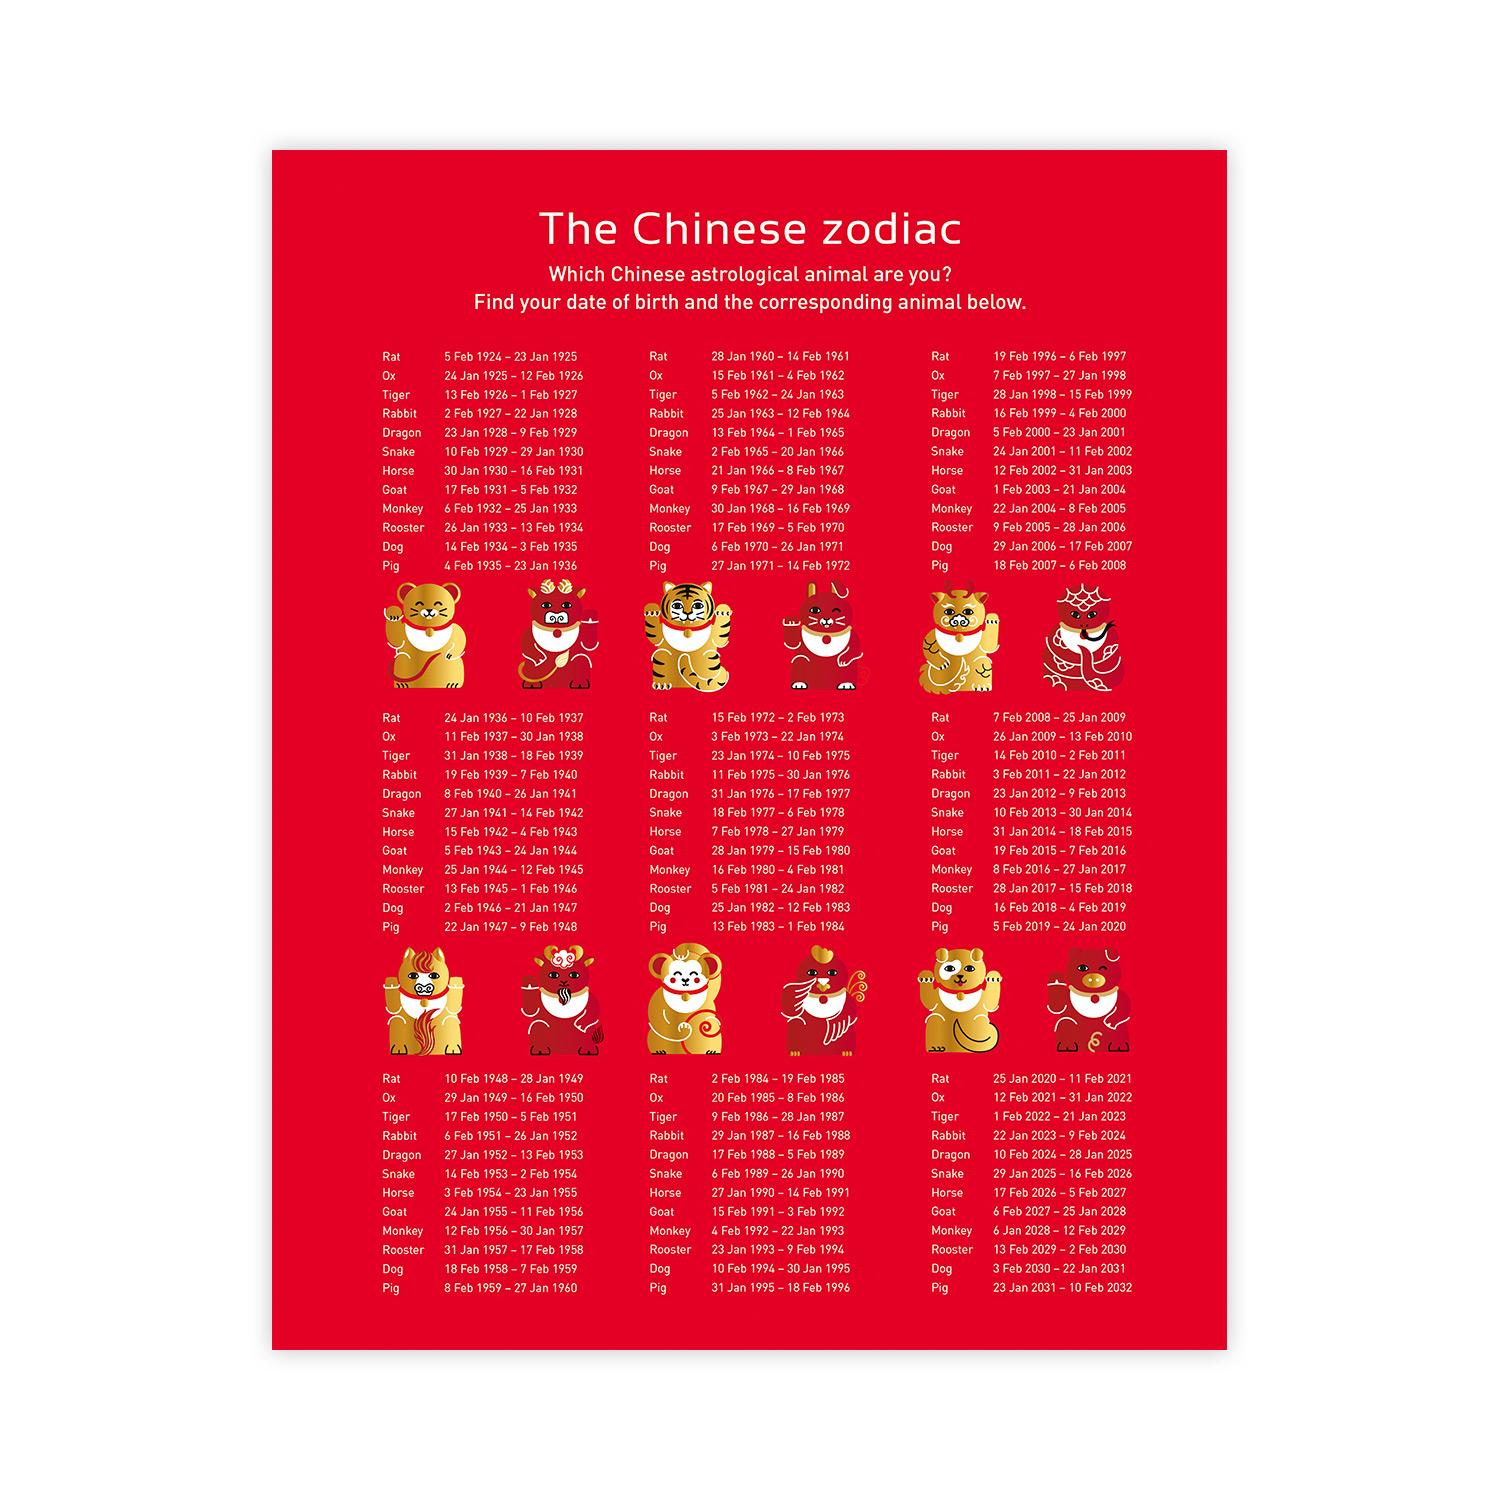 Lunar Calendar Year Of The Tiger 2022 Sheetlet Pack - Year Of The Tiger 2022